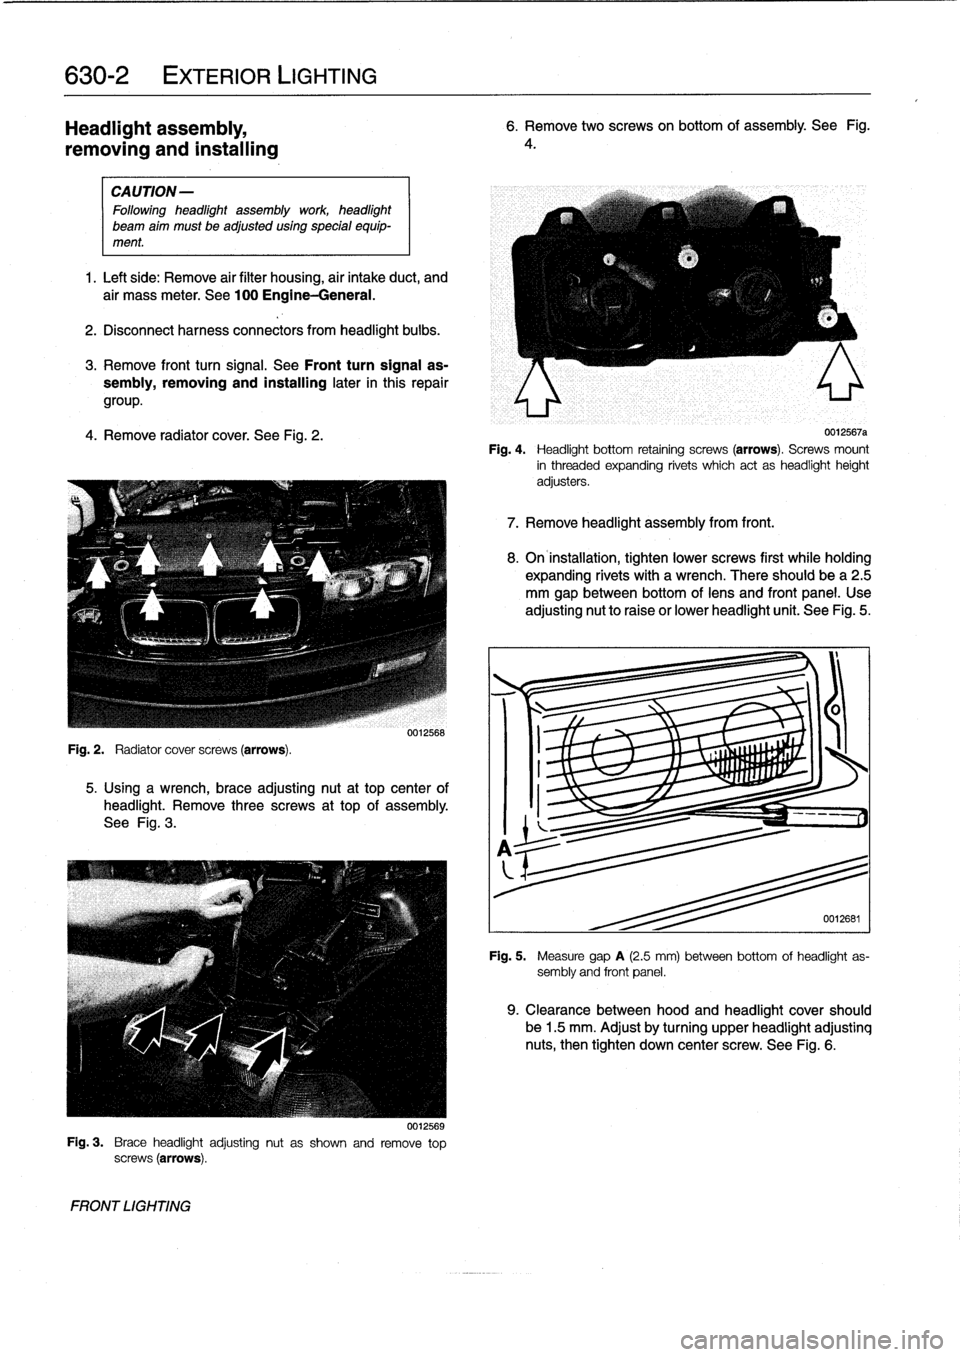 BMW 328i 1993 E36 Workshop Manual 
630-2

	

EXTERIOR
LIGHTING

Headlight
assembly,

removing
and
installing

CAUTION-

Followingheadlight
assembly
work
headlight

beam
aim
must
be
adjusted
using
special
equip-
ment
.

1
.
Left
side
: